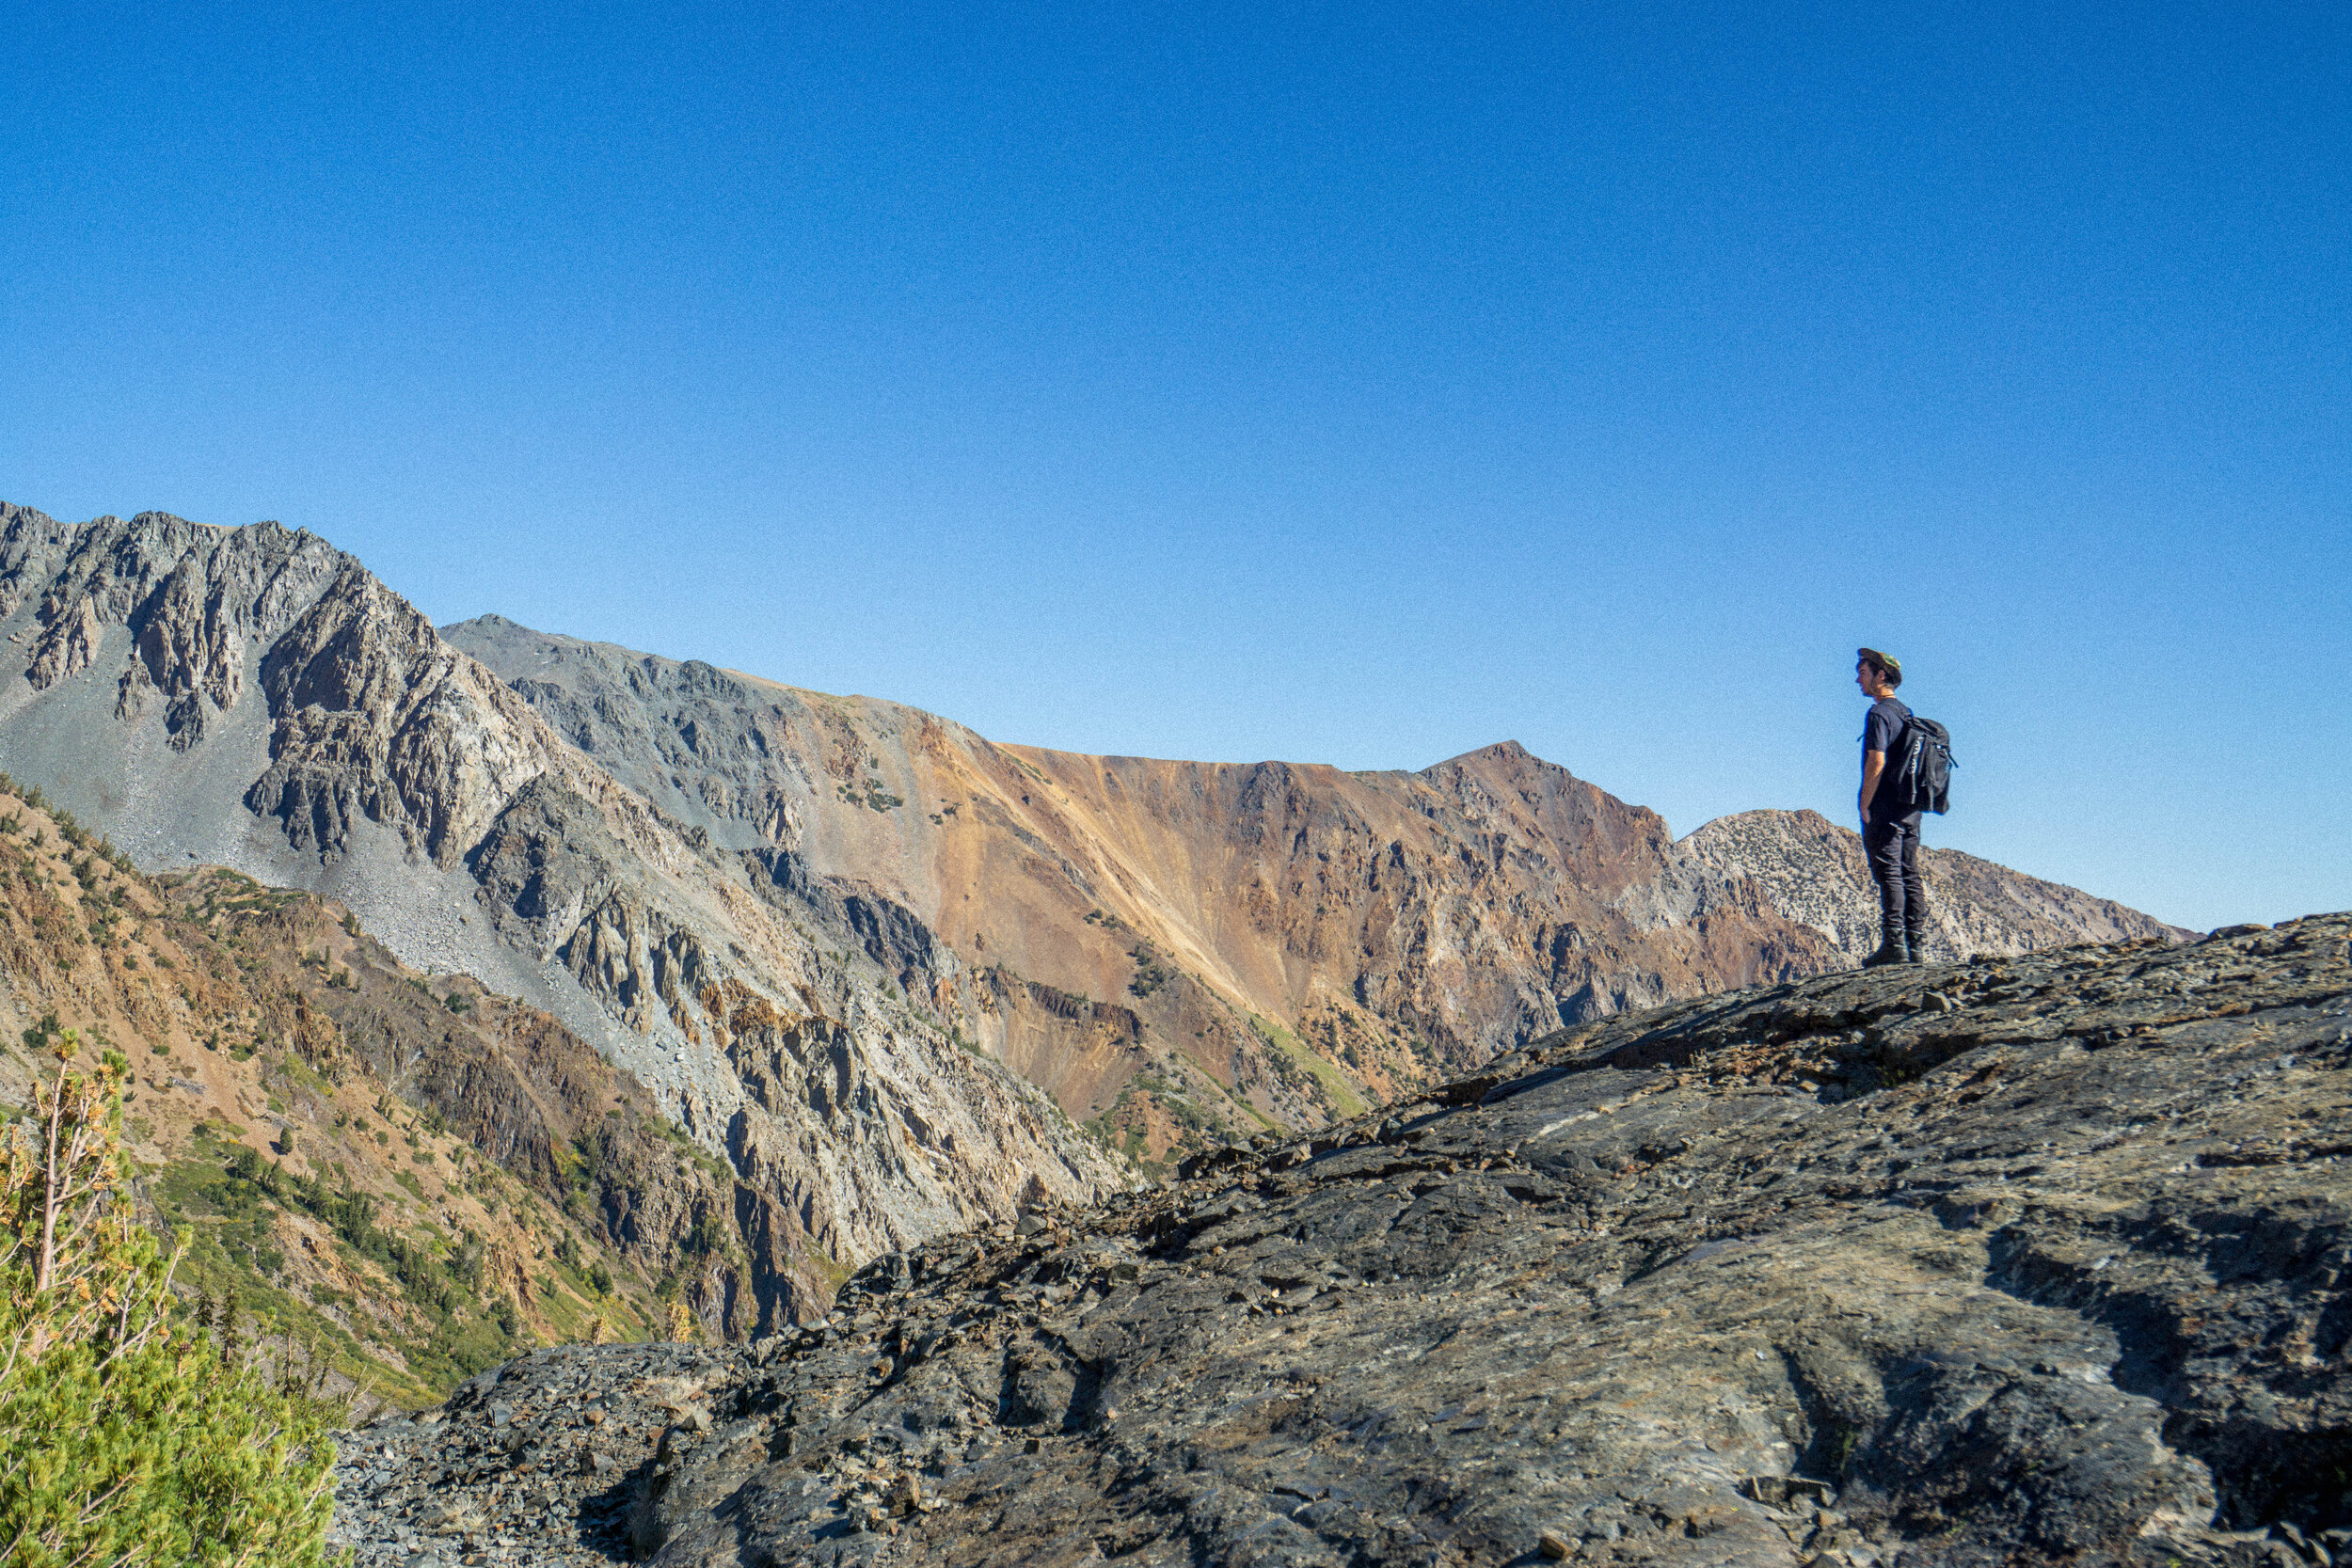 The Sierras are known for their granite peaks, but this hike also had what some call the 'Old Sierras', a red-hued sheet of brittle volcanic rock that formed long before the granite peaks.